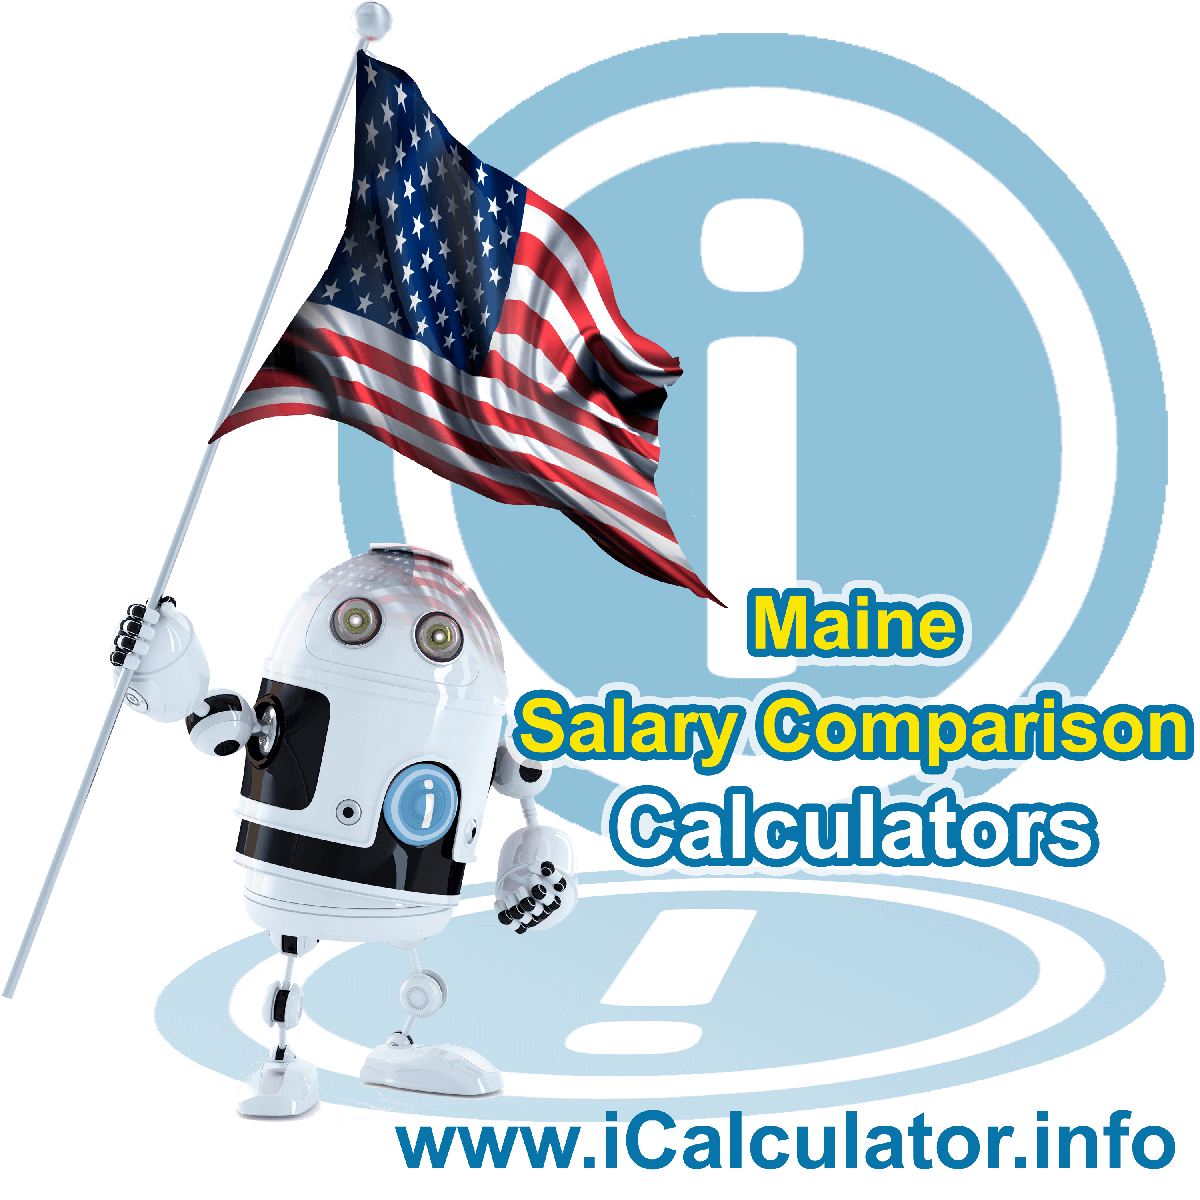 Maine Salary Comparison Calculator 2023 | iCalculator™ | The Maine Salary Comparison Calculator allows you to quickly calculate and compare upto 6 salaries in Maine or compare with other states for the 2023 tax year and historical tax years. 